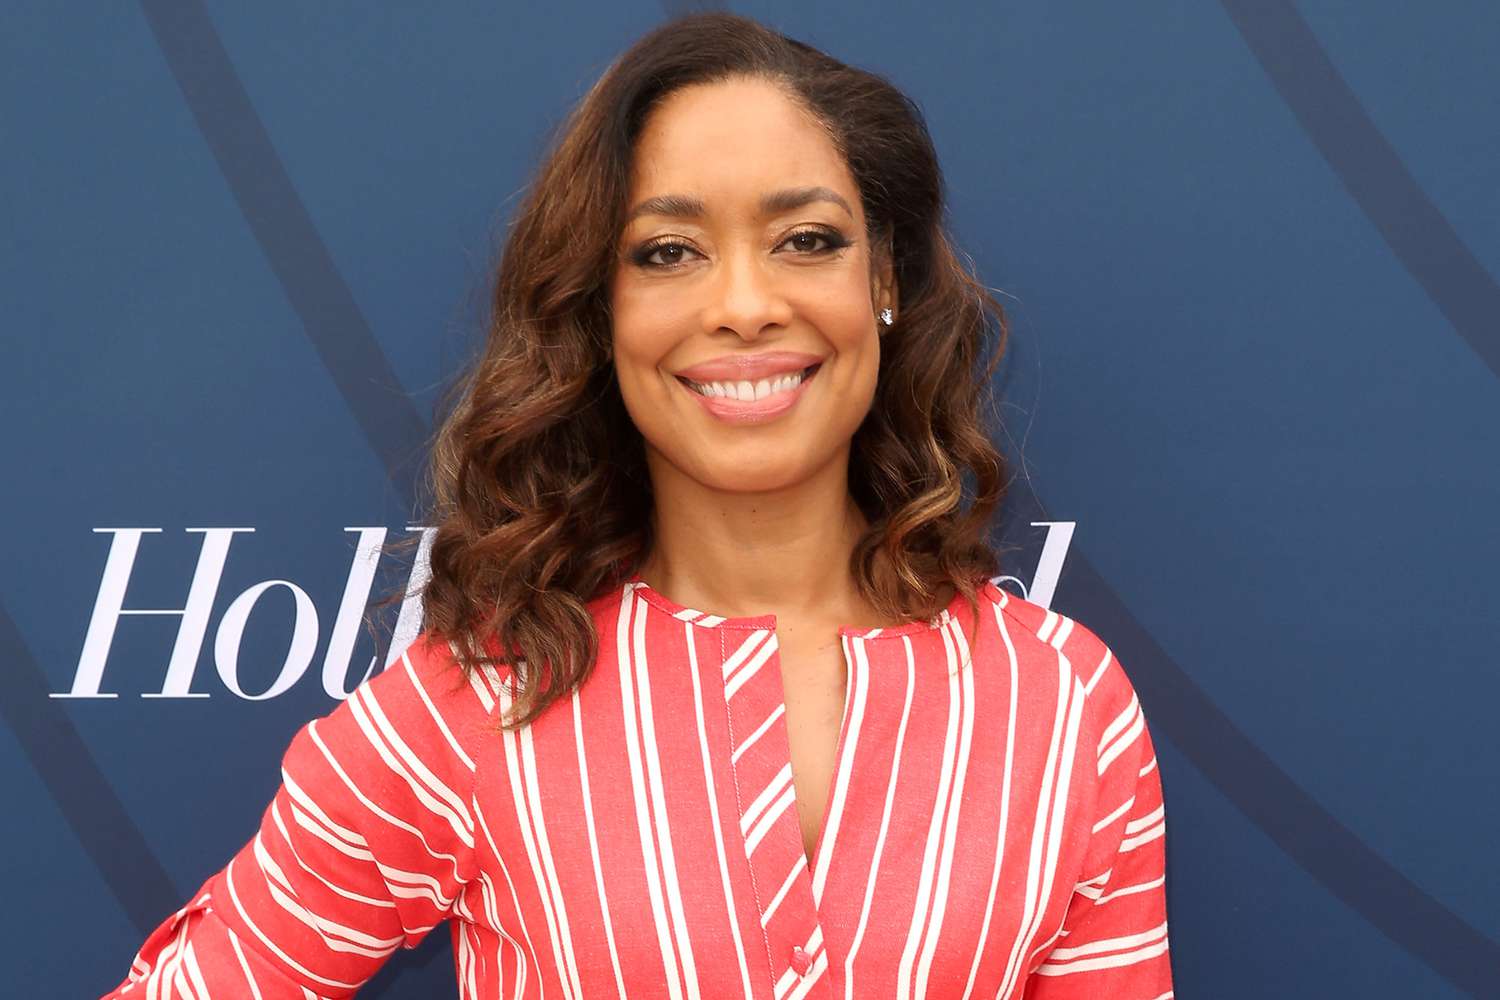 Gina Torres attends The Hollywood Reporter's Empowerment In Entertainment Event 2019 at Milk Studios on April 30, 2019 in Los Angeles, California.